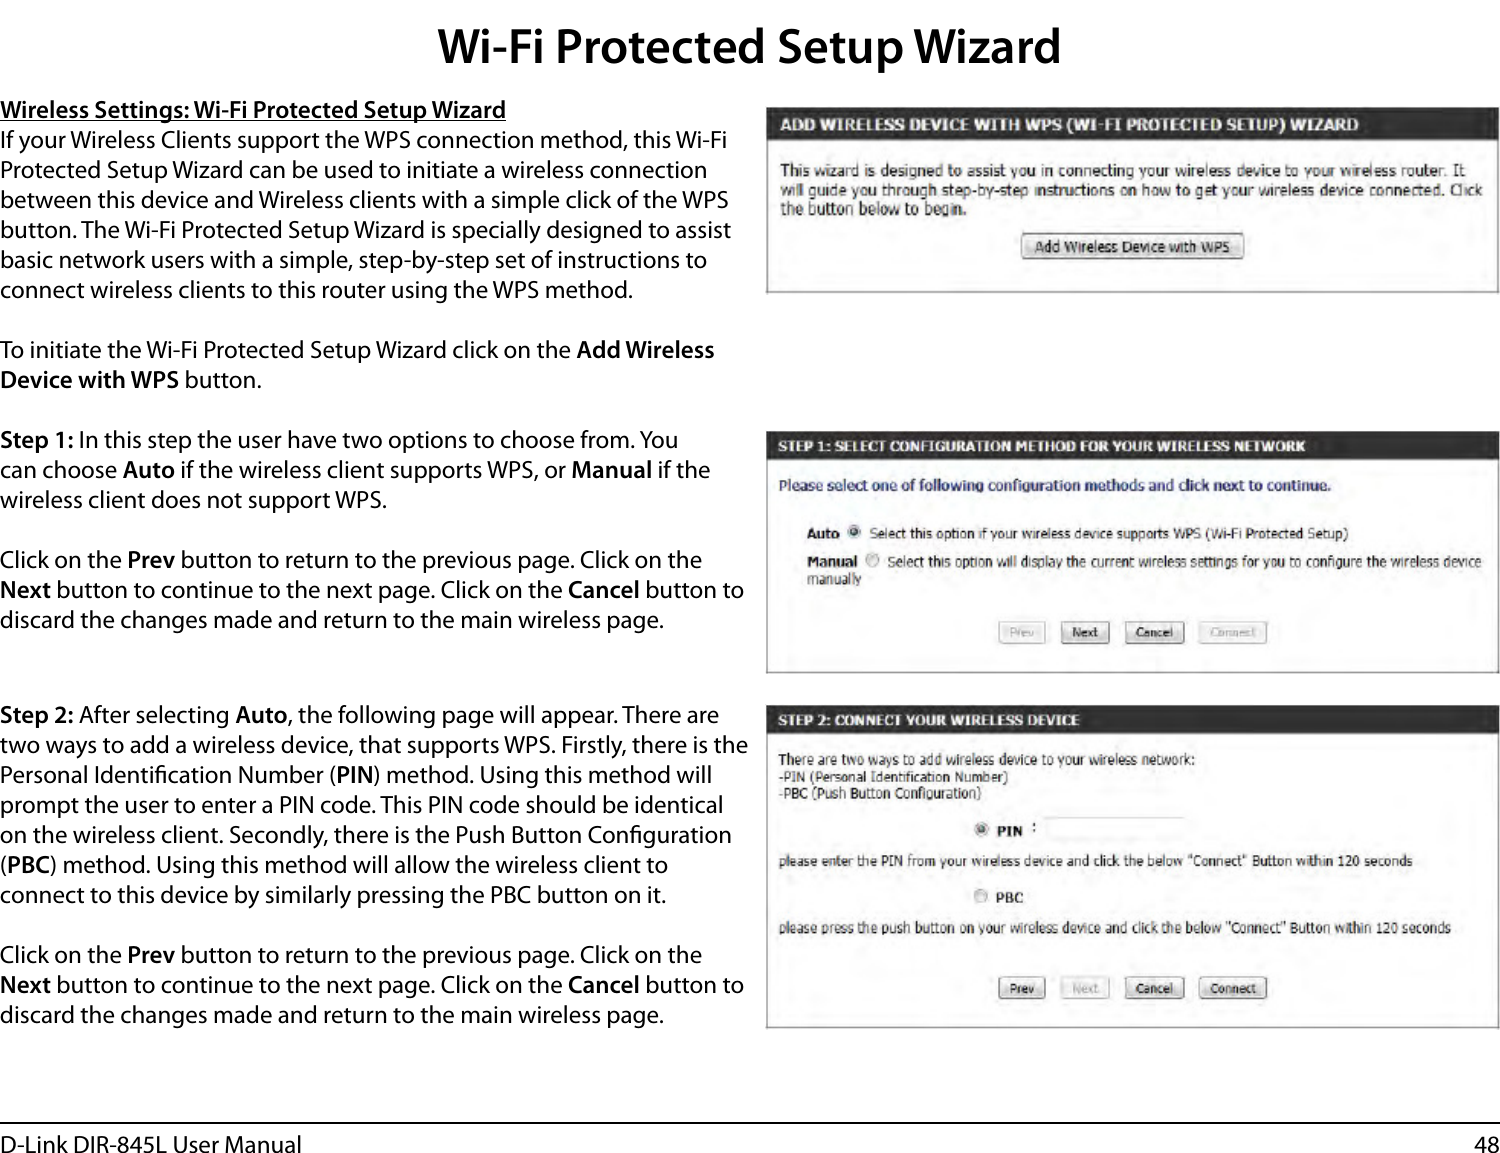 48D-Link DIR-845L User ManualWireless Settings: Wi-Fi Protected Setup WizardIf your Wireless Clients support the WPS connection method, this Wi-Fi Protected Setup Wizard can be used to initiate a wireless connection between this device and Wireless clients with a simple click of the WPS button. The Wi-Fi Protected Setup Wizard is specially designed to assist basic network users with a simple, step-by-step set of instructions to connect wireless clients to this router using the WPS method.To initiate the Wi-Fi Protected Setup Wizard click on the Add Wireless Device with WPS button.Step 1: In this step the user have two options to choose from. You can choose Auto if the wireless client supports WPS, or Manual if the wireless client does not support WPS.Click on the Prev button to return to the previous page. Click on the Next button to continue to the next page. Click on the Cancel button to discard the changes made and return to the main wireless page.Step 2: After selecting Auto, the following page will appear. There are two ways to add a wireless device, that supports WPS. Firstly, there is the Personal Identication Number (PIN) method. Using this method will prompt the user to enter a PIN code. This PIN code should be identical on the wireless client. Secondly, there is the Push Button Conguration (PBC) method. Using this method will allow the wireless client to connect to this device by similarly pressing the PBC button on it.Click on the Prev button to return to the previous page. Click on the Next button to continue to the next page. Click on the Cancel button to discard the changes made and return to the main wireless page.Wi-Fi Protected Setup Wizard